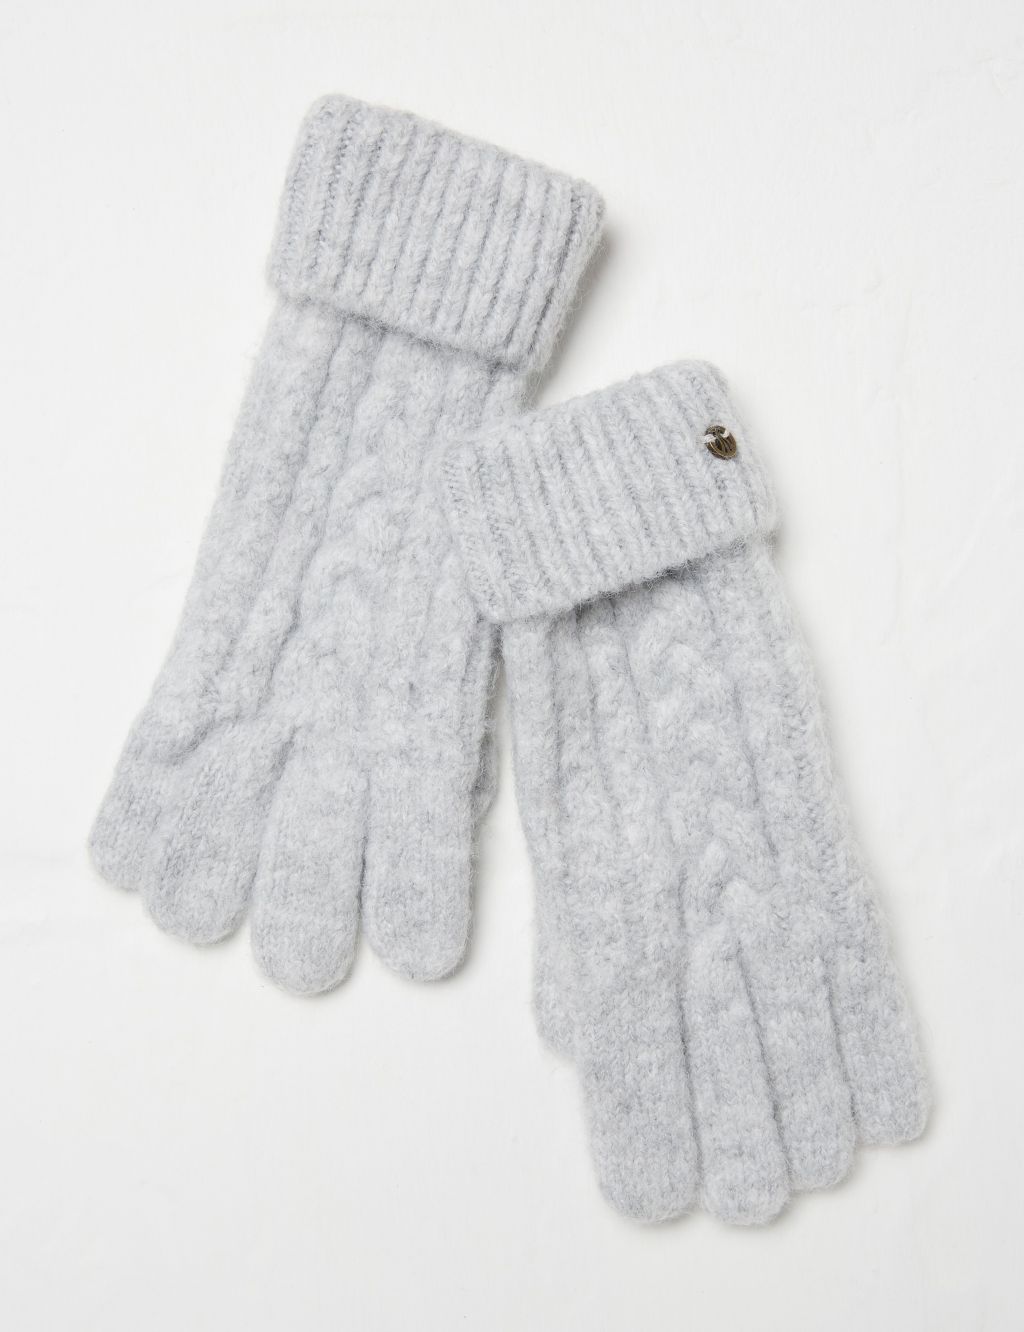 Knitted Cable Gloves with Wool image 1